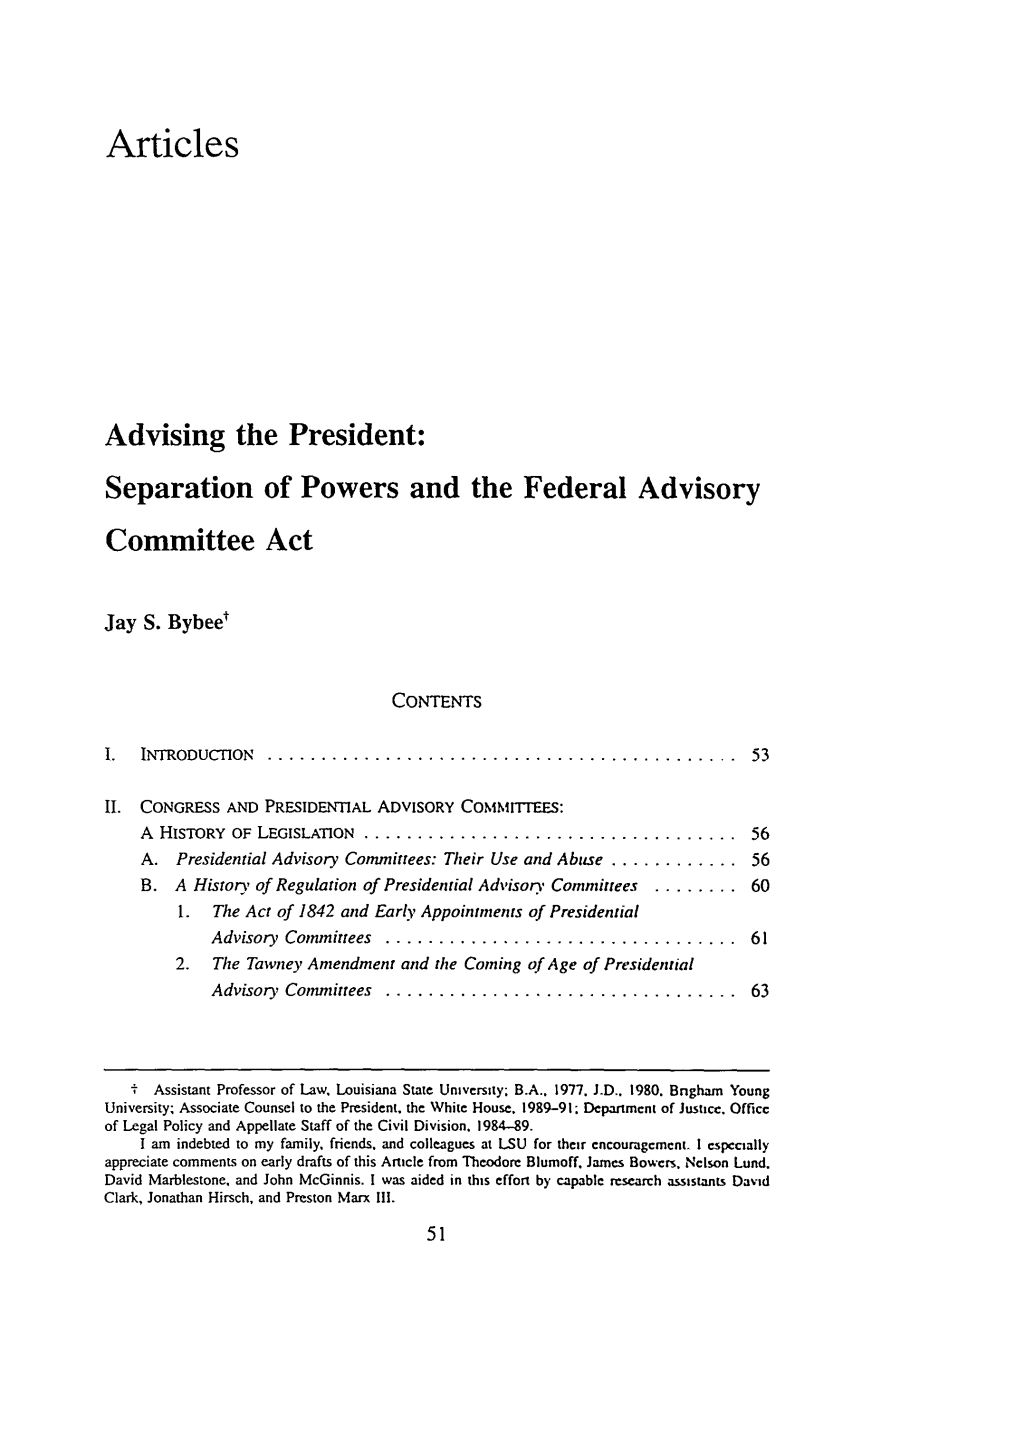 Advising the President: Separation of Powers and the Federal Advisory Committee Act